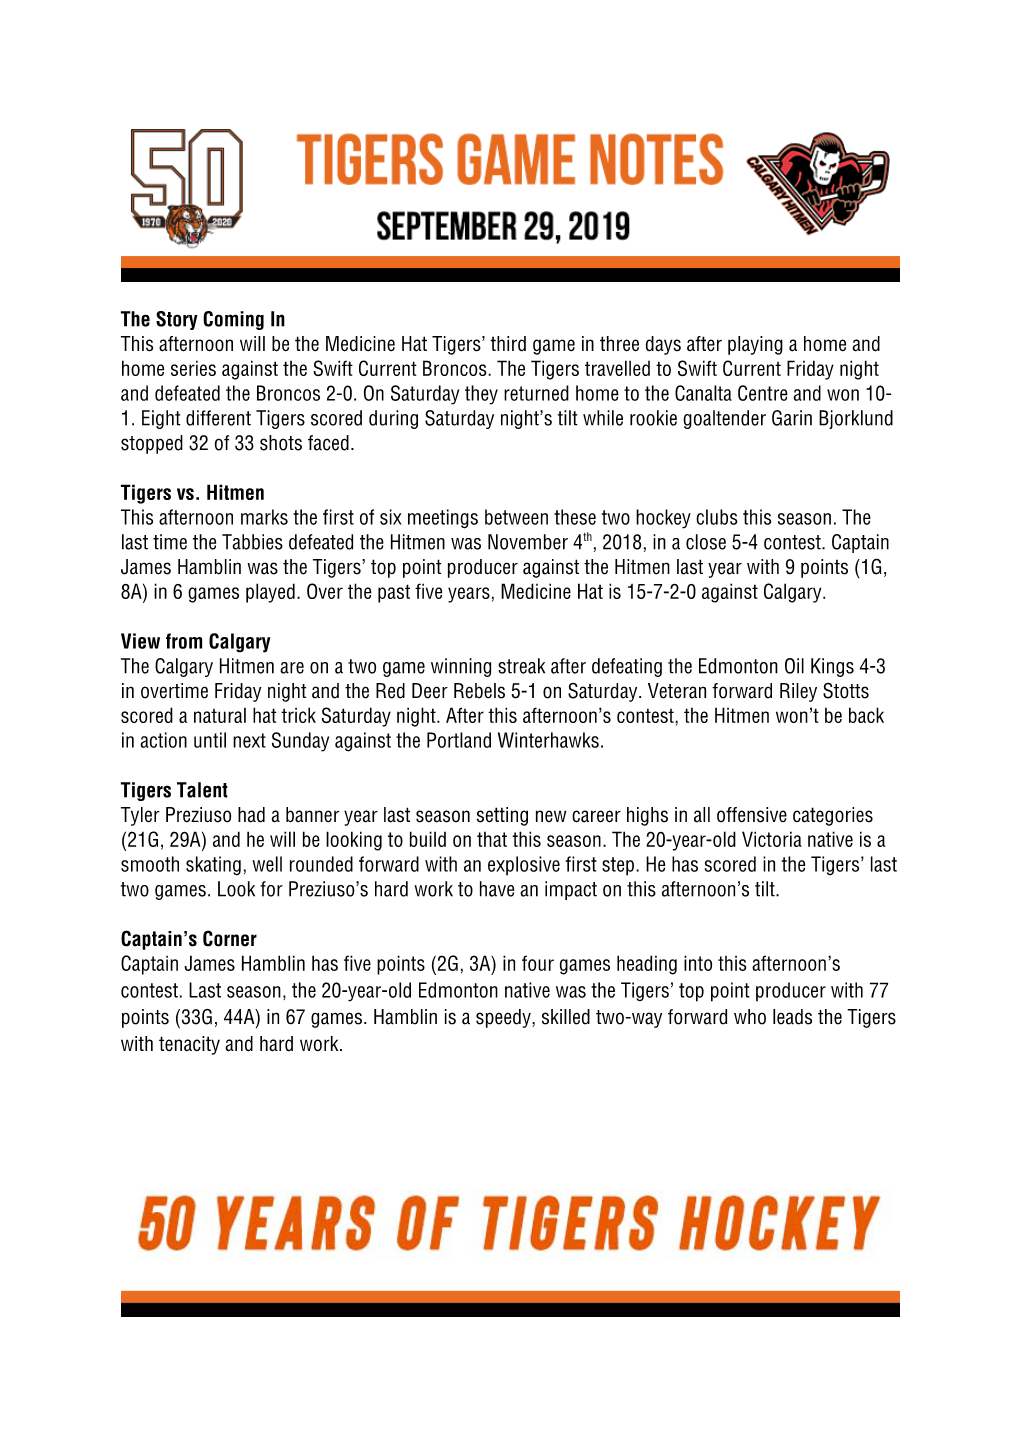 The Story Coming in This Afternoon Will Be the Medicine Hat Tigers' Third Game in Three Days After Playing a Home and Home